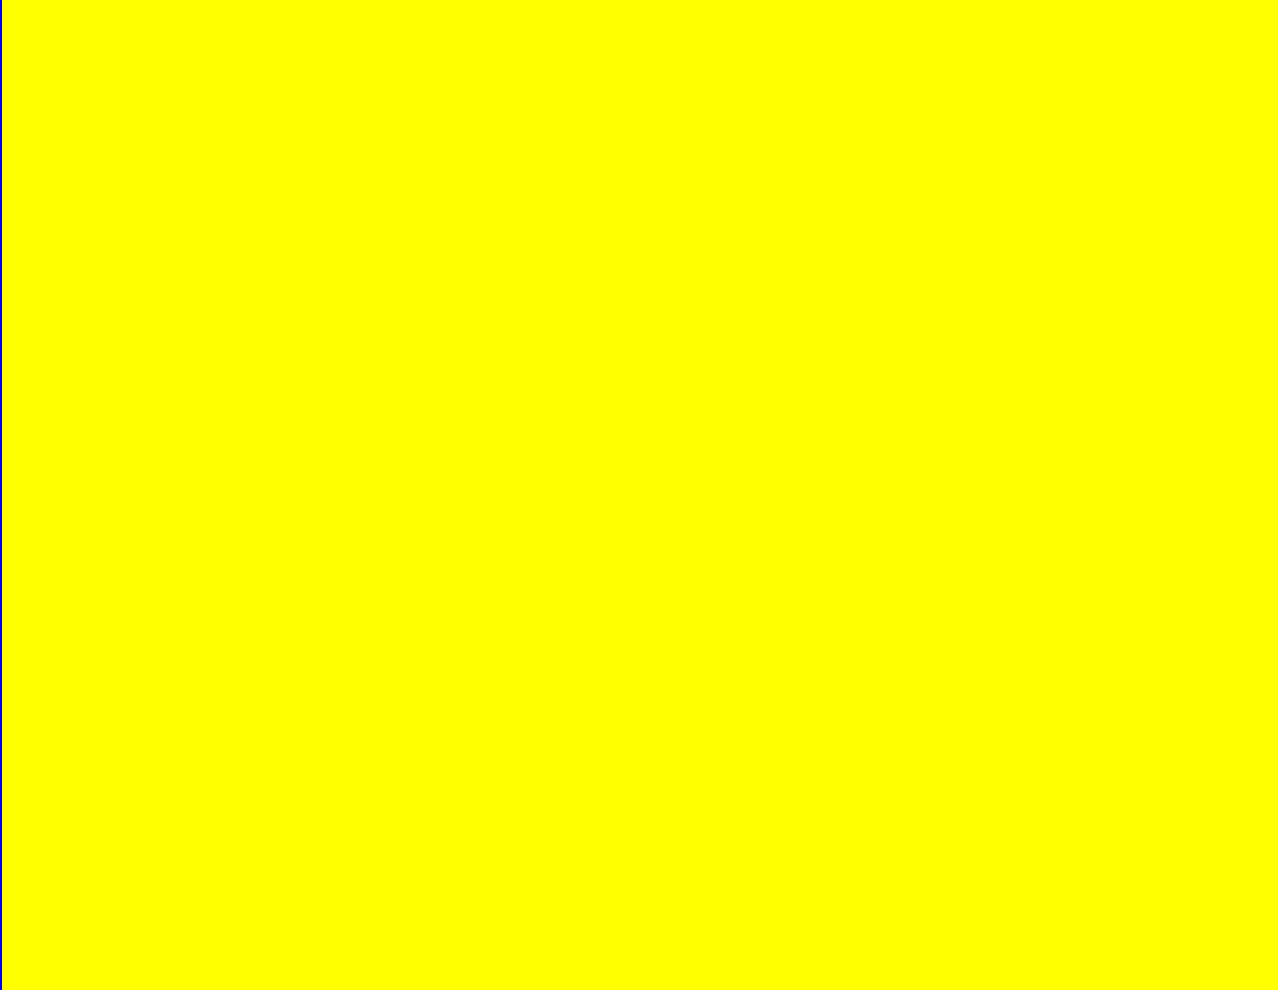 Pure yellow test screen